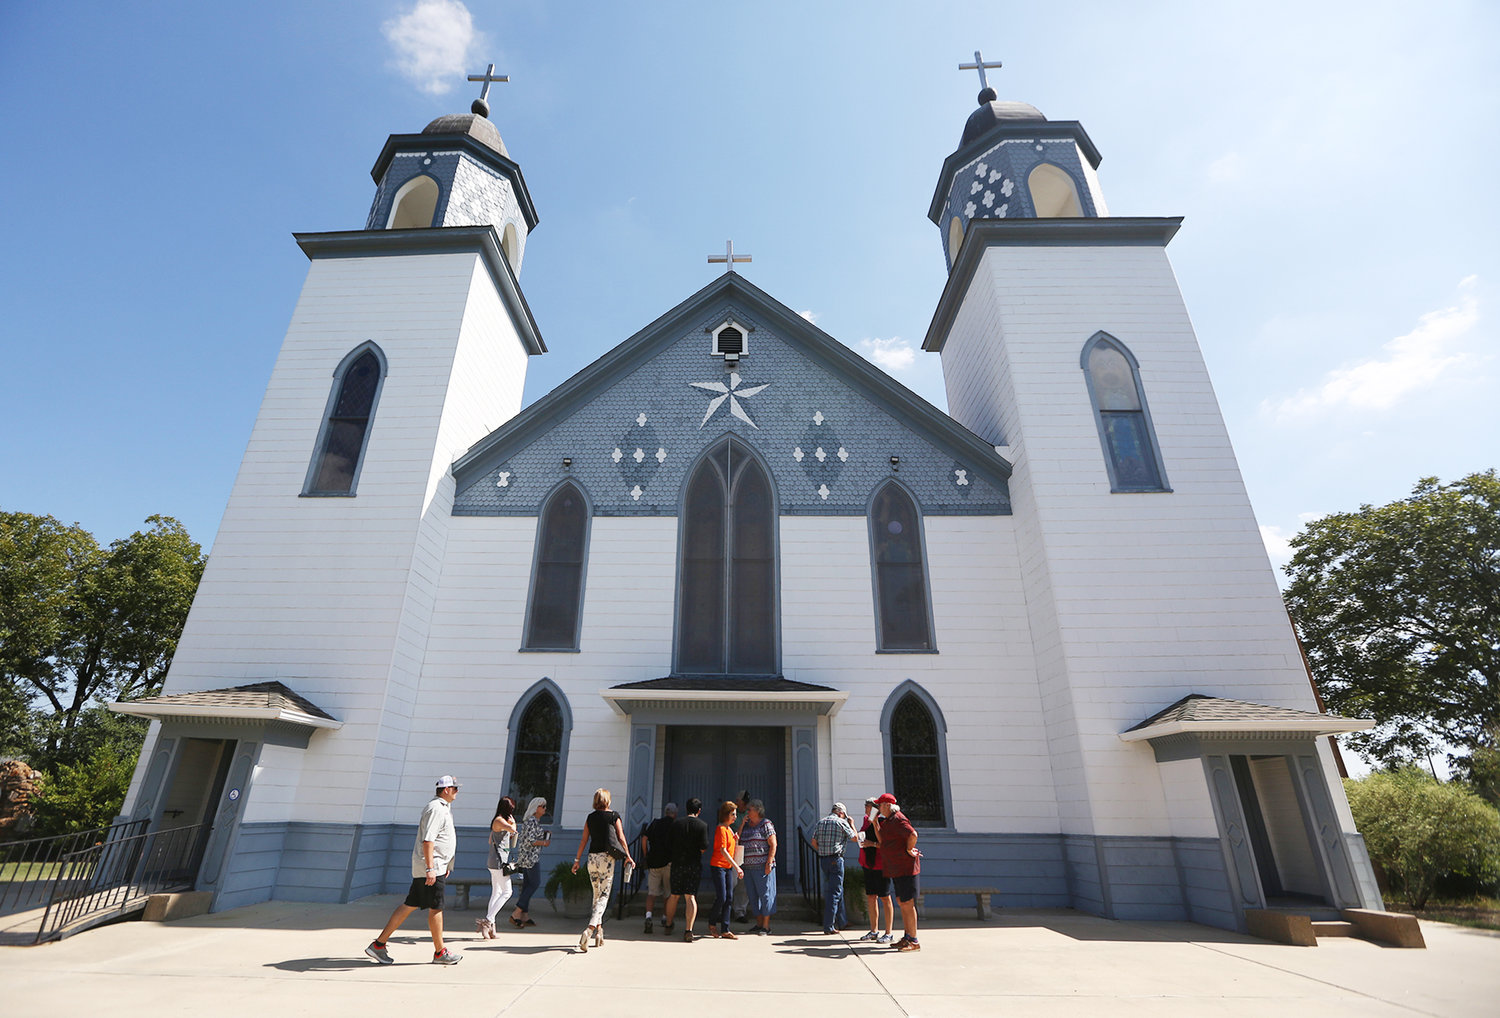 Parishioners enter the historic 124-year-old Church of the Visitation Oct. 7, 2017, in Westphalia, Texas. The church was destroyed in a fire the morning of July 29, 2019. The parish has served the Catholic community of southwestern Falls County, many of them immigrants from the northwest German region of Westphalia, since 1883.